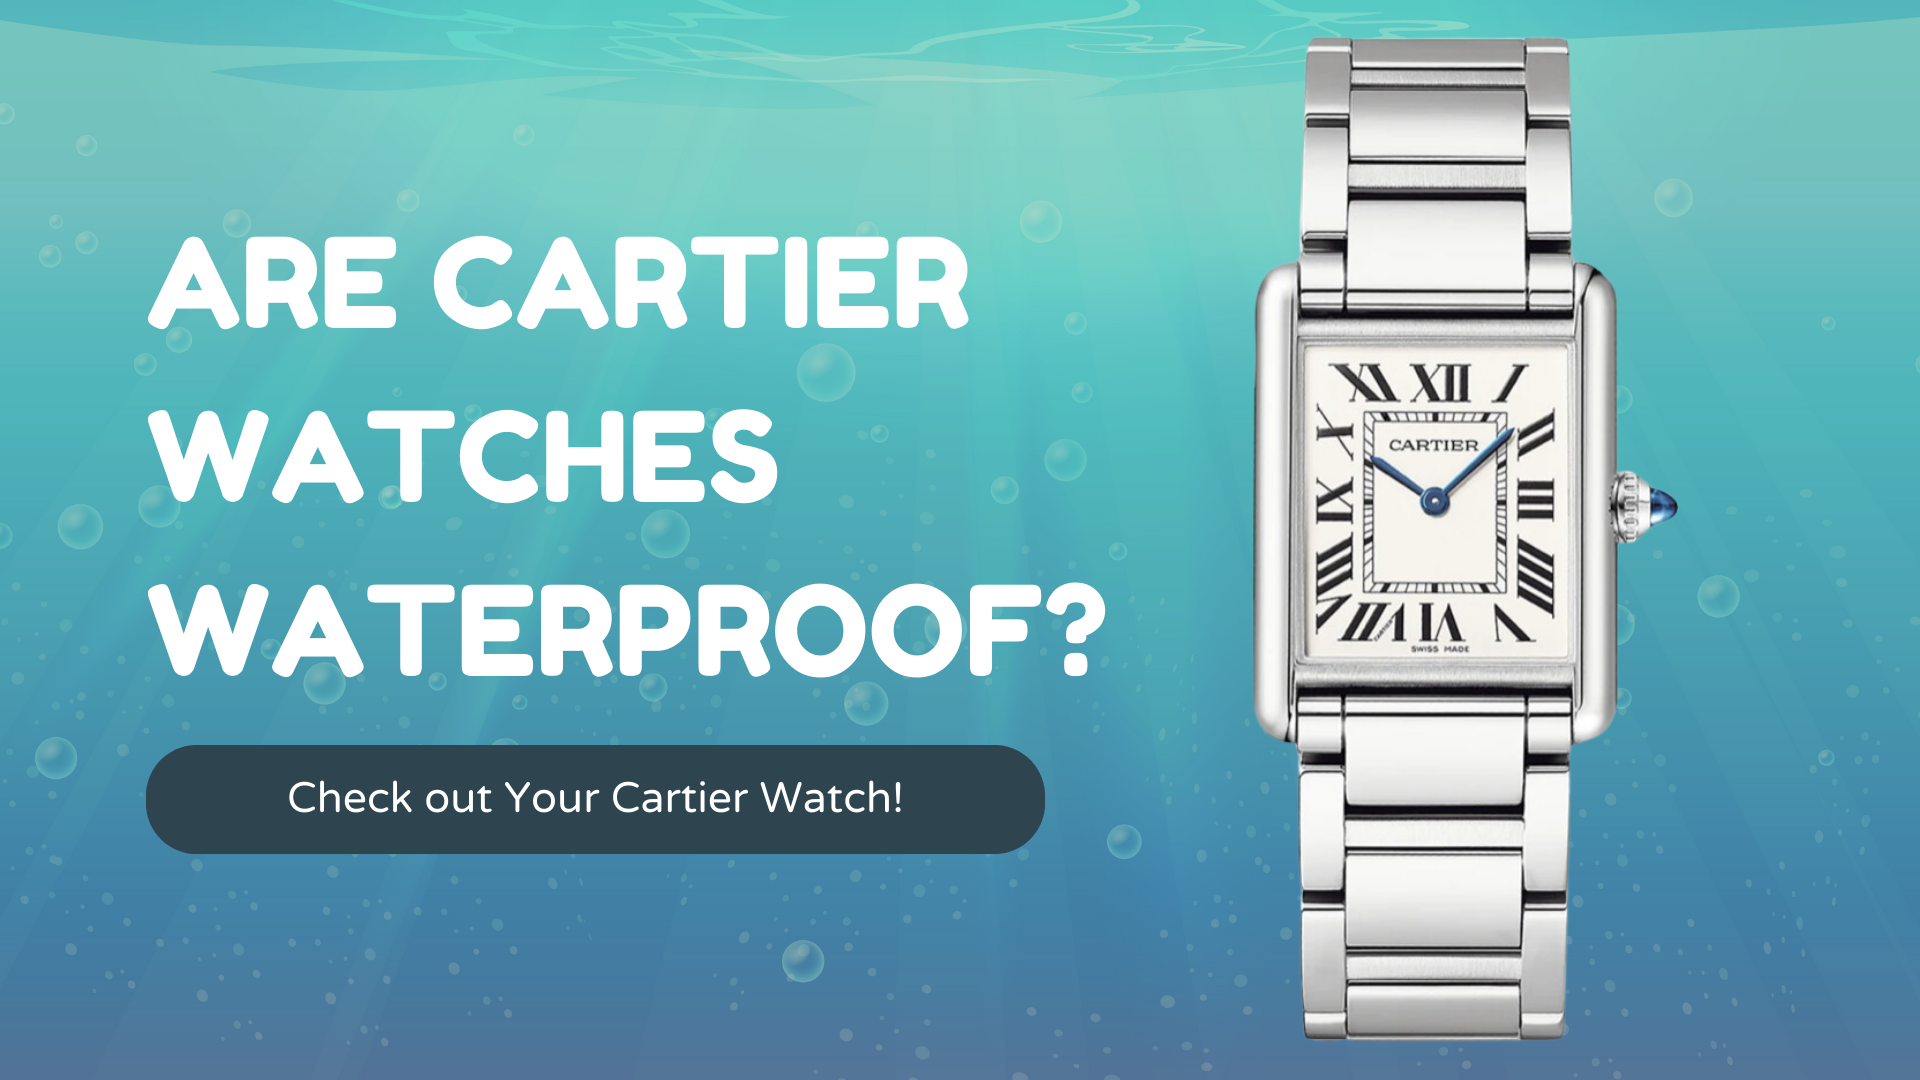 Are Cartier Watches Waterproof? Check out Your Cartier Watch!